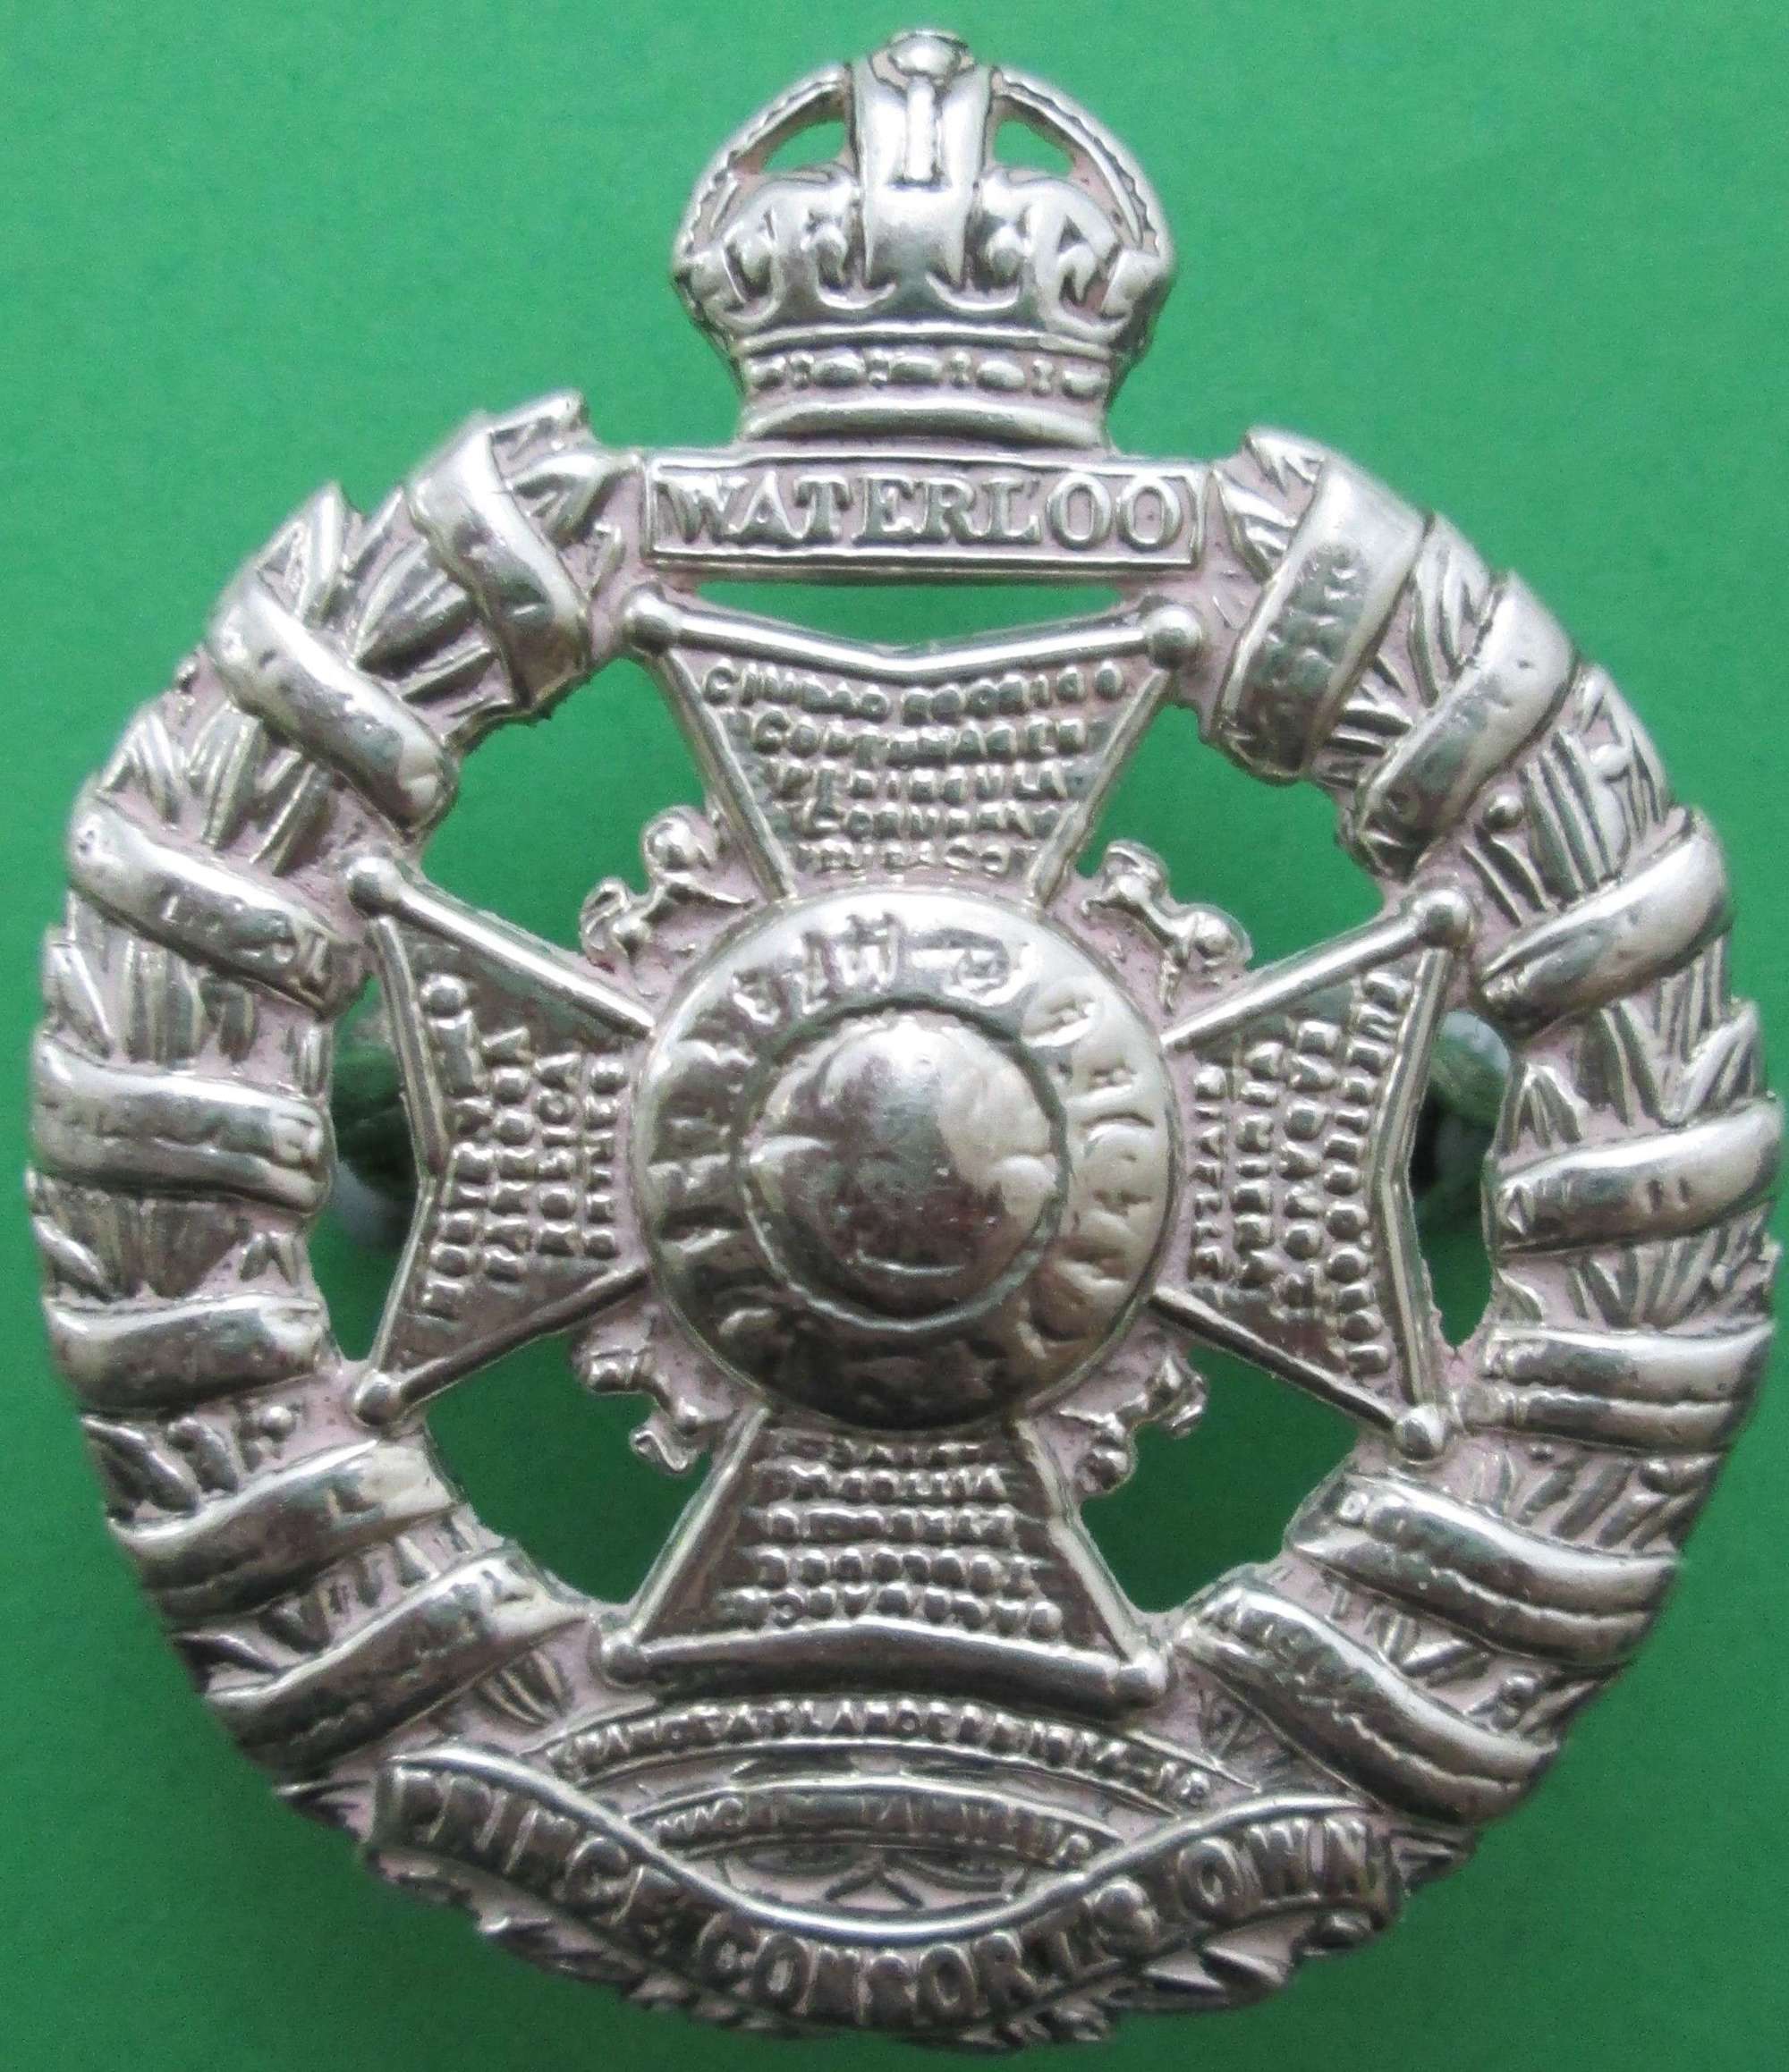 A RIFLE BRIGADE STERLING SILVER OFFICER'S BADGE